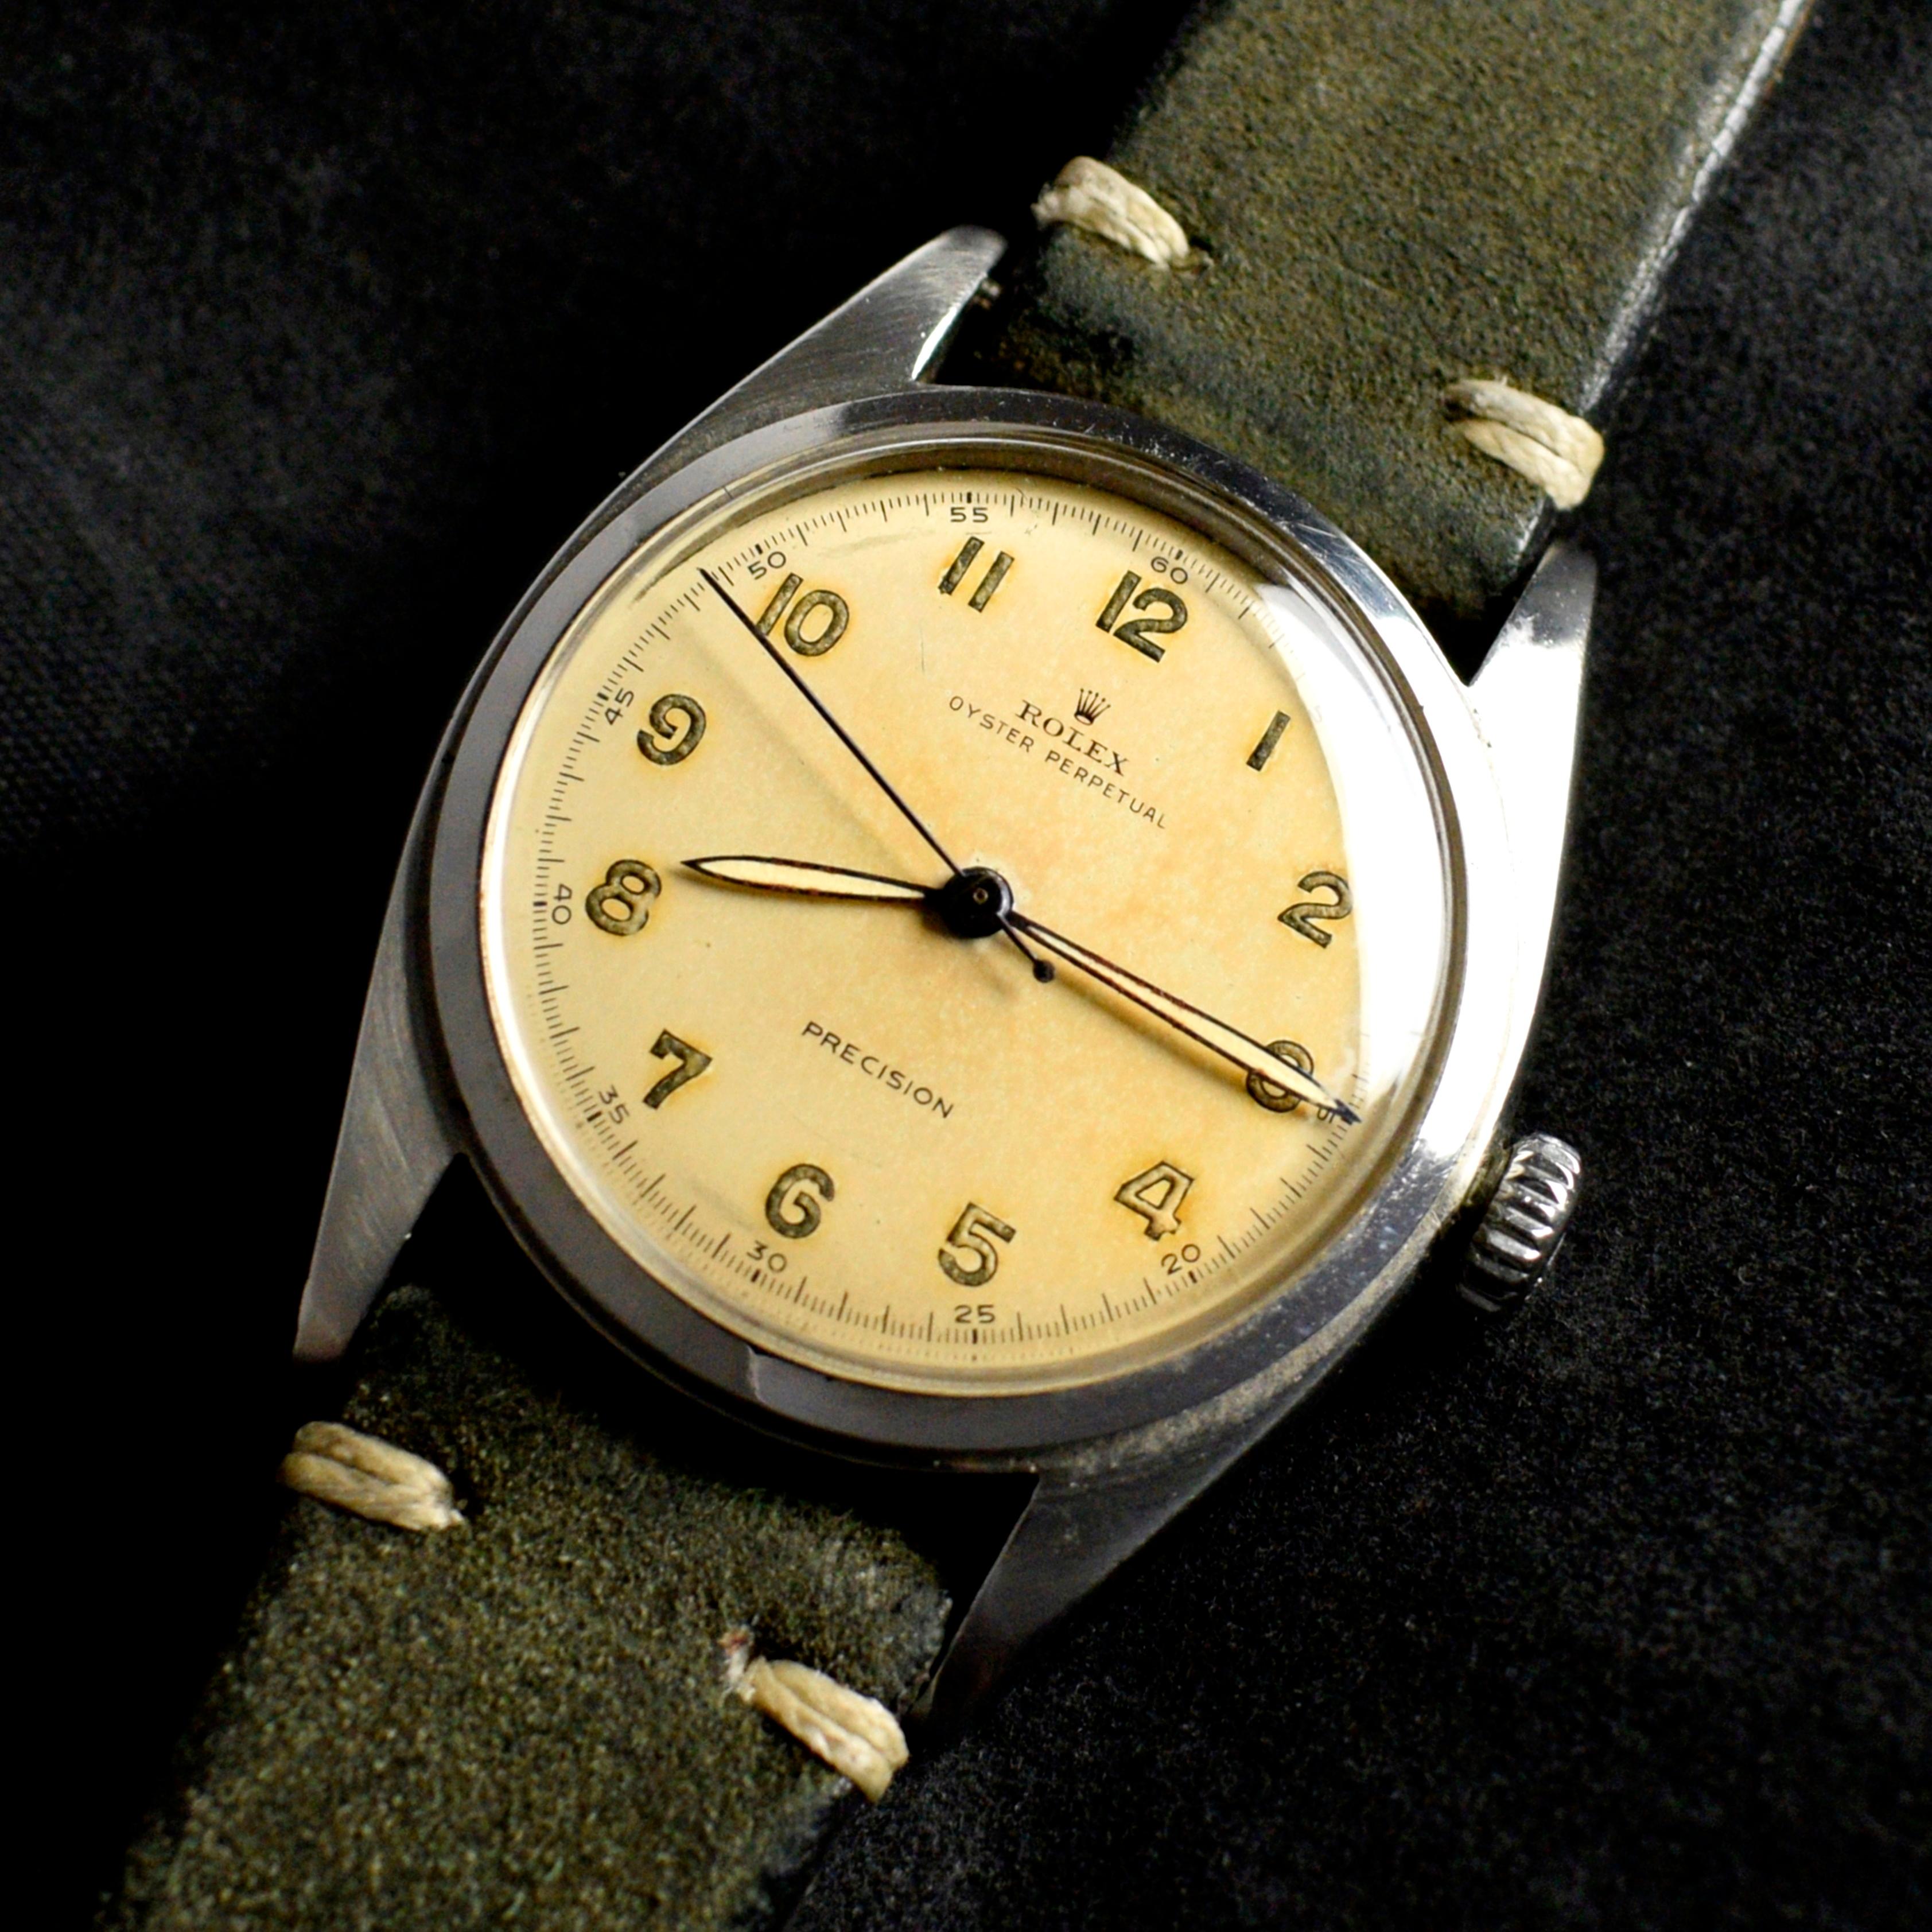 Brand: Vintage Rolex
Model: 6028
Year: 1952
Serial number: 84xxxx
Reference: OT1575

Case: 36mm diameter without crown; show sign of wear with slight polish from previous; inner case back stamped 6028 IV.52

Dial: Aged Condition Creamy Dial with